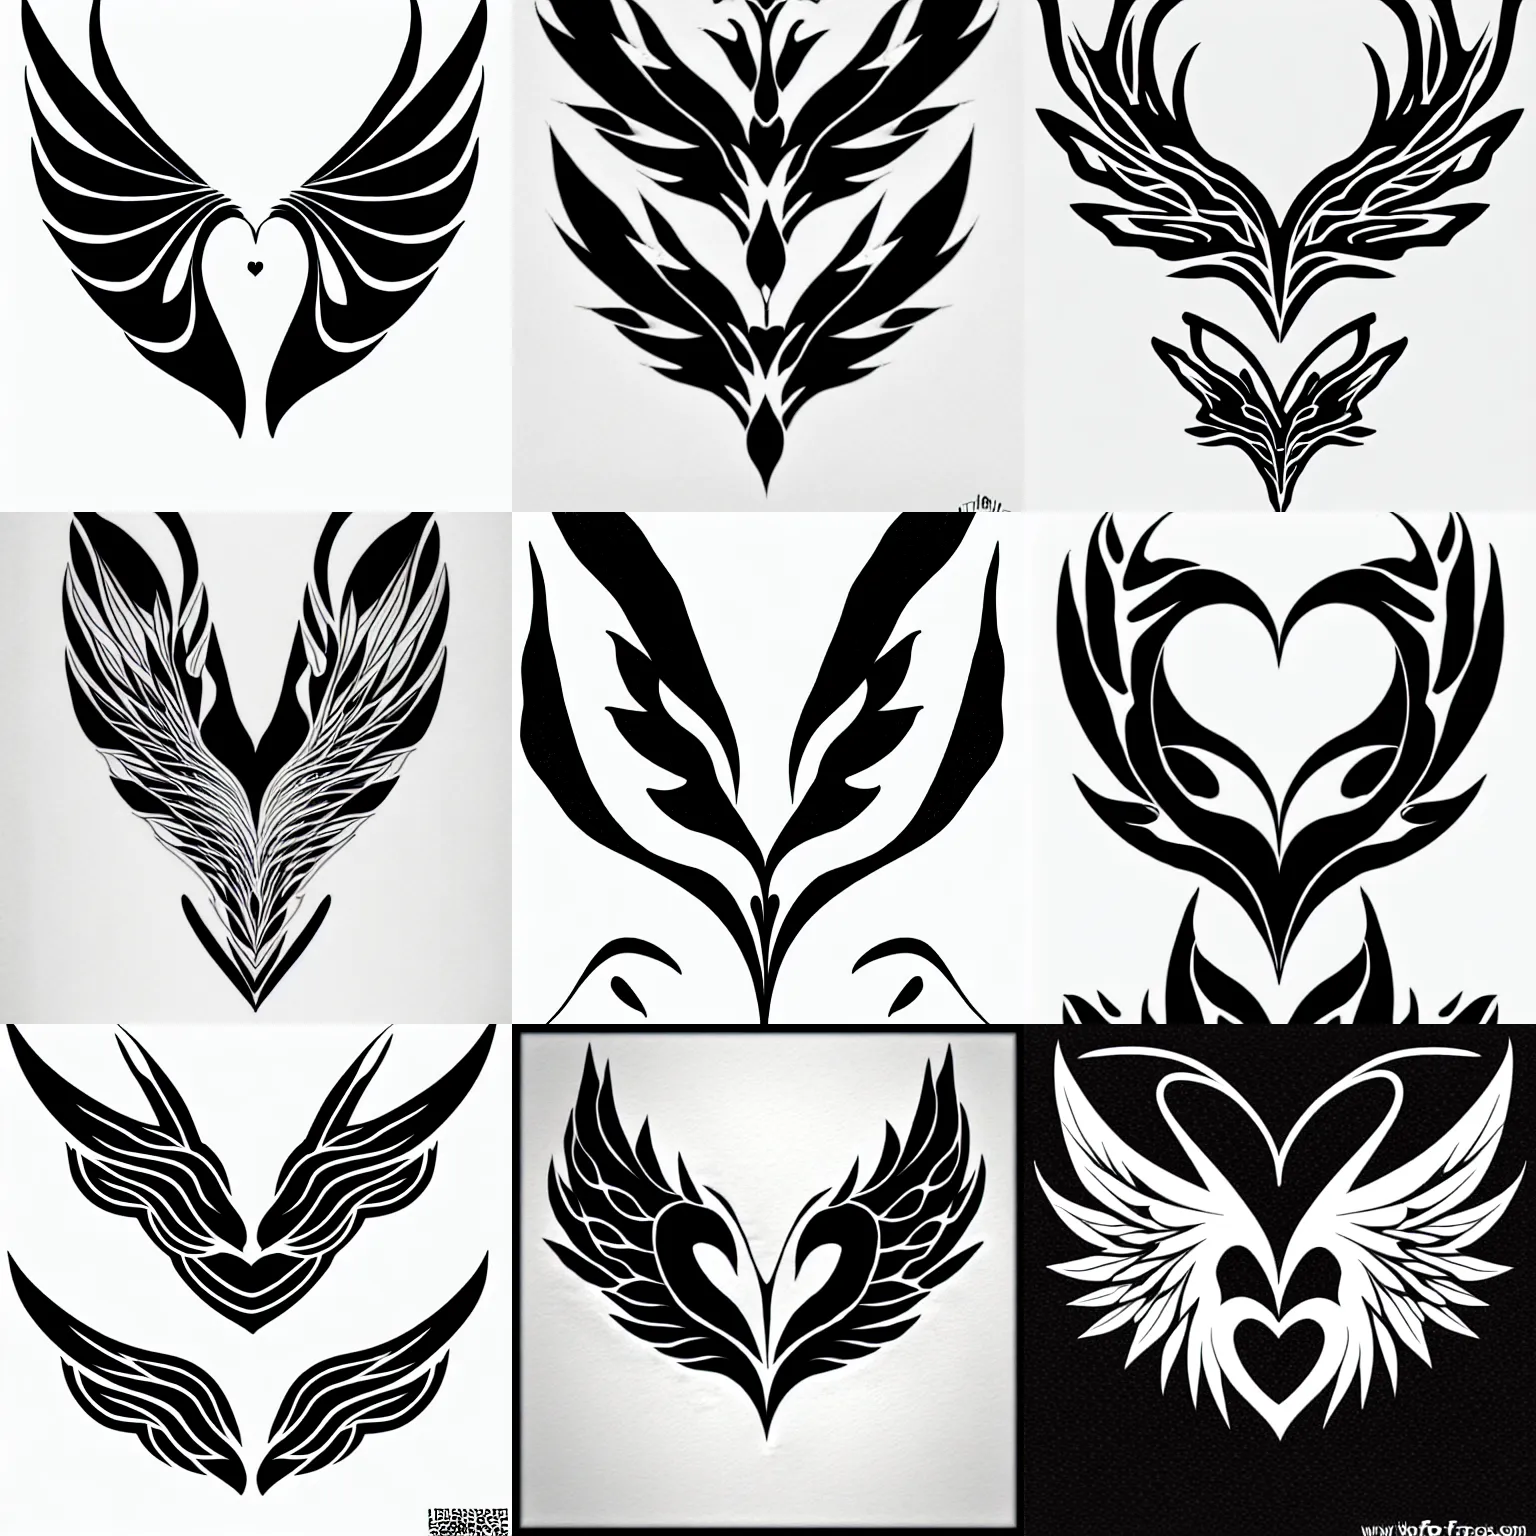 Prompt: tattoo design, Winged-thorny-heart Winged-Fox fractal, simple design on white background, clean black pen drawing